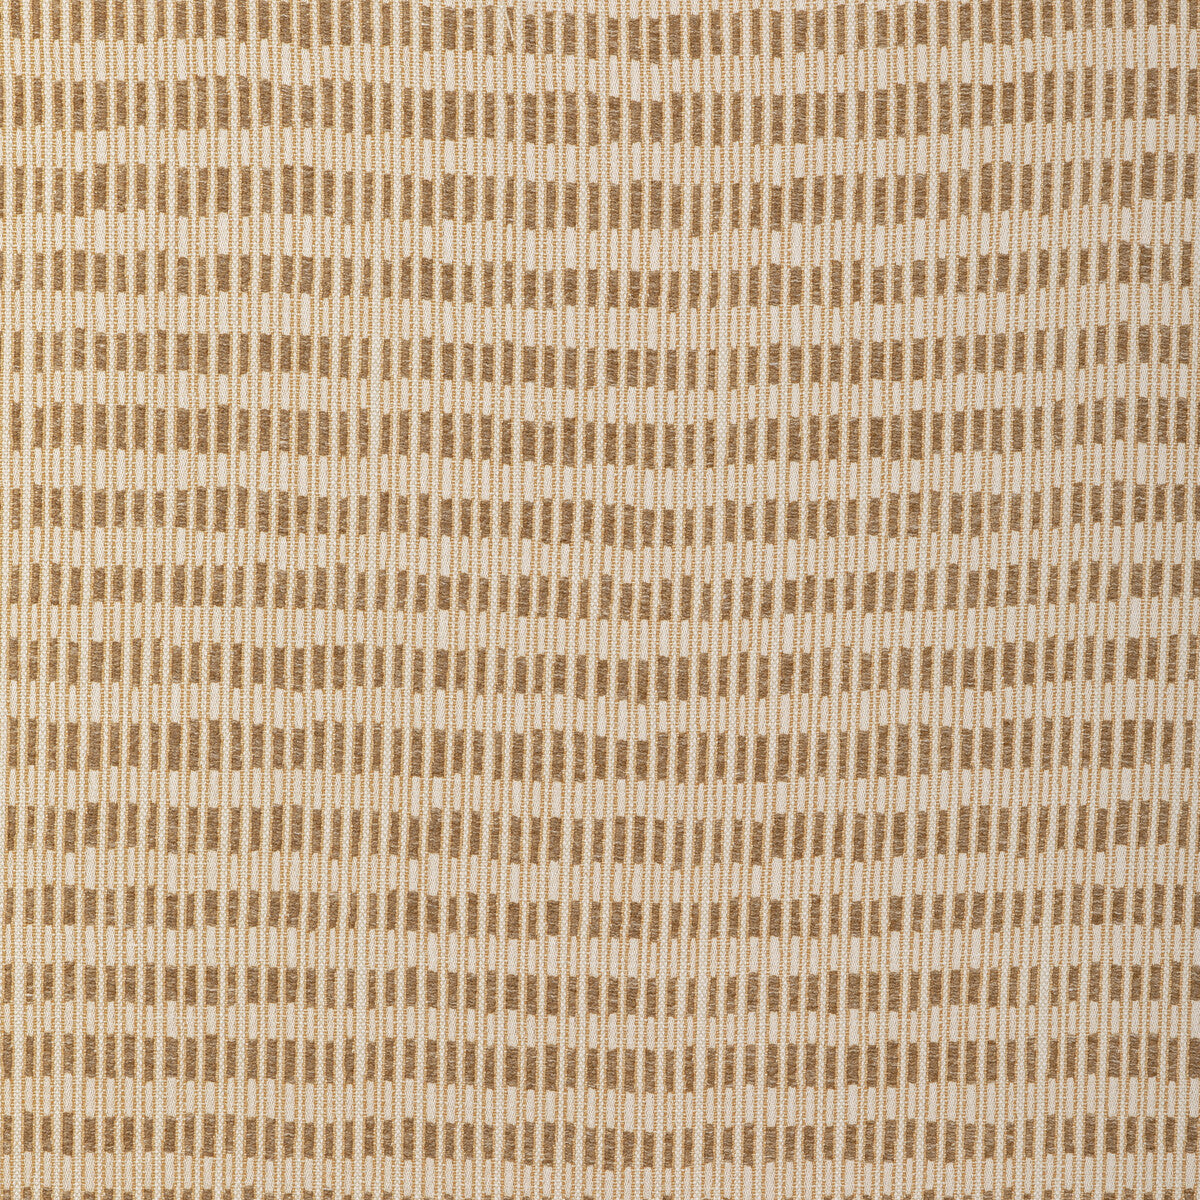 Baja fabric in coin color - pattern GWF-3797.416.0 - by Lee Jofa Modern in the Kelly Wearstler VIII collection